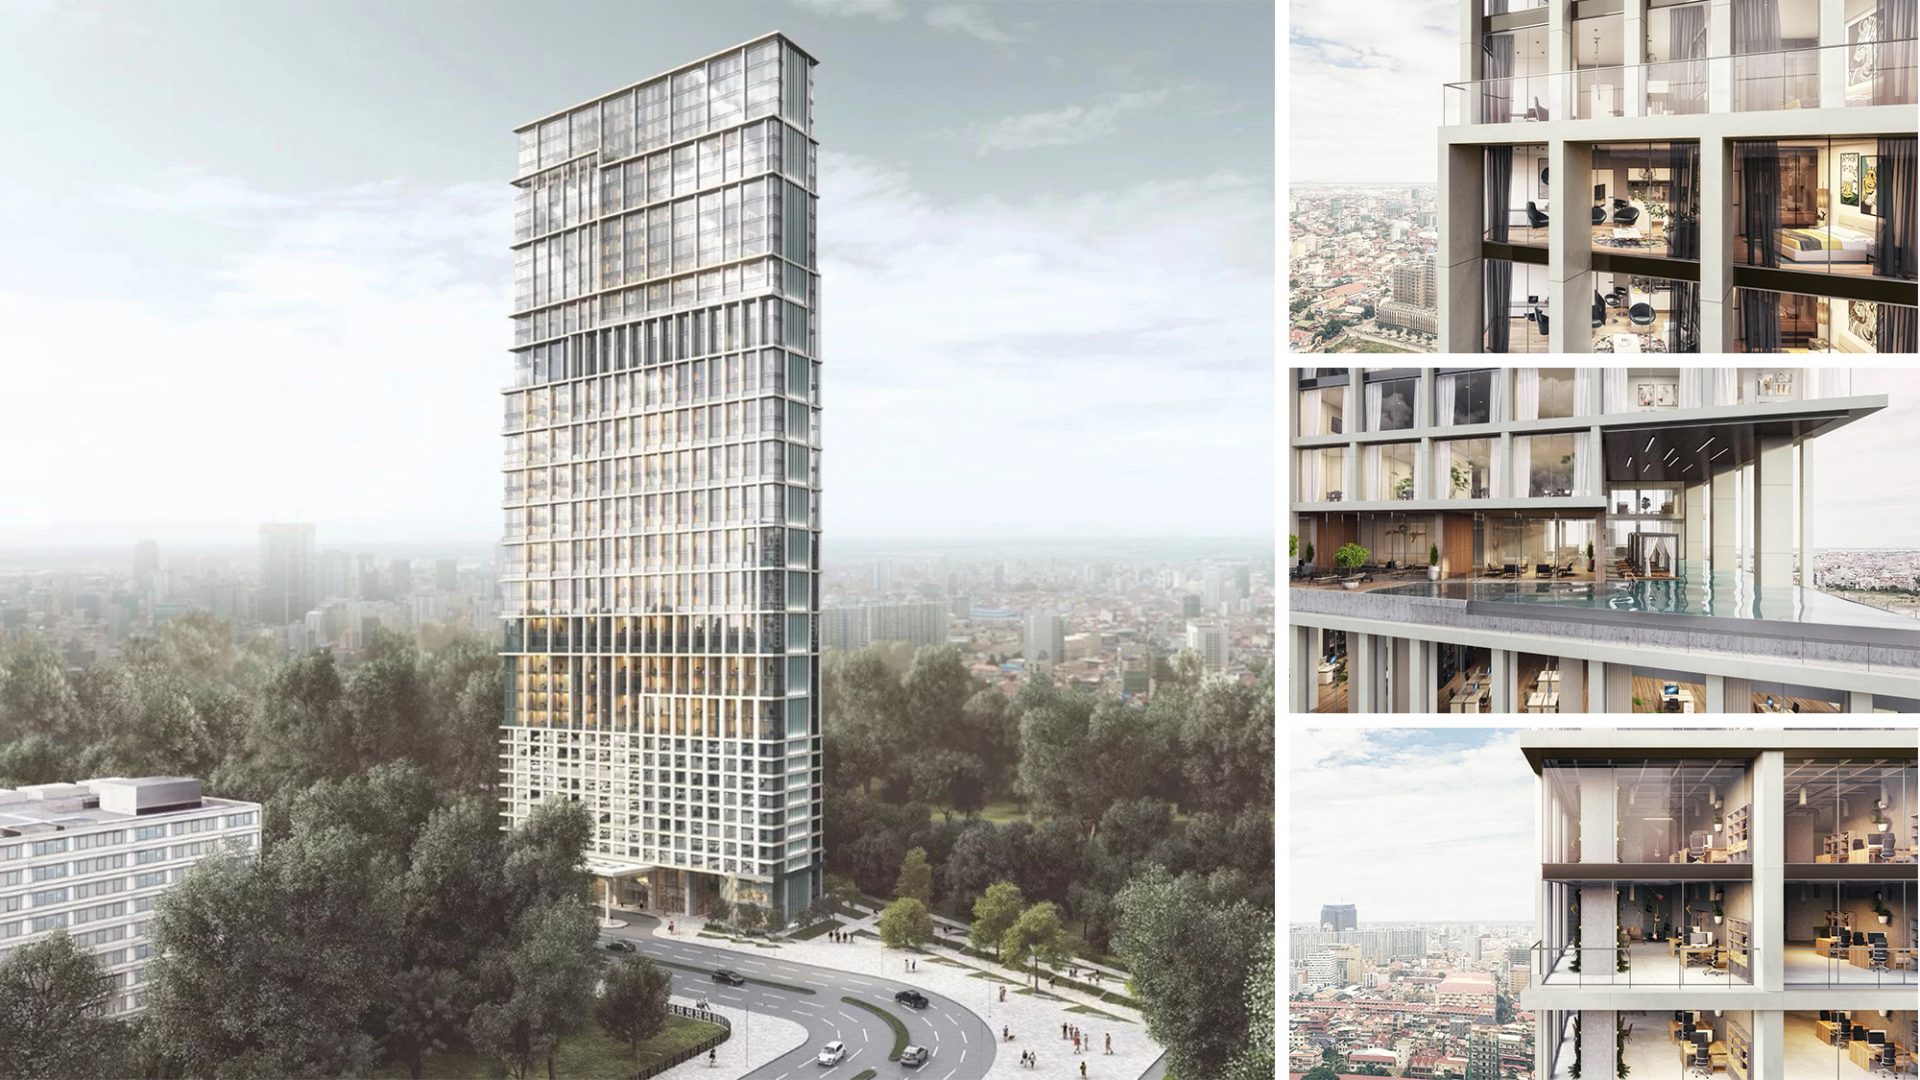 3D Rendering for a High-rise Building Design